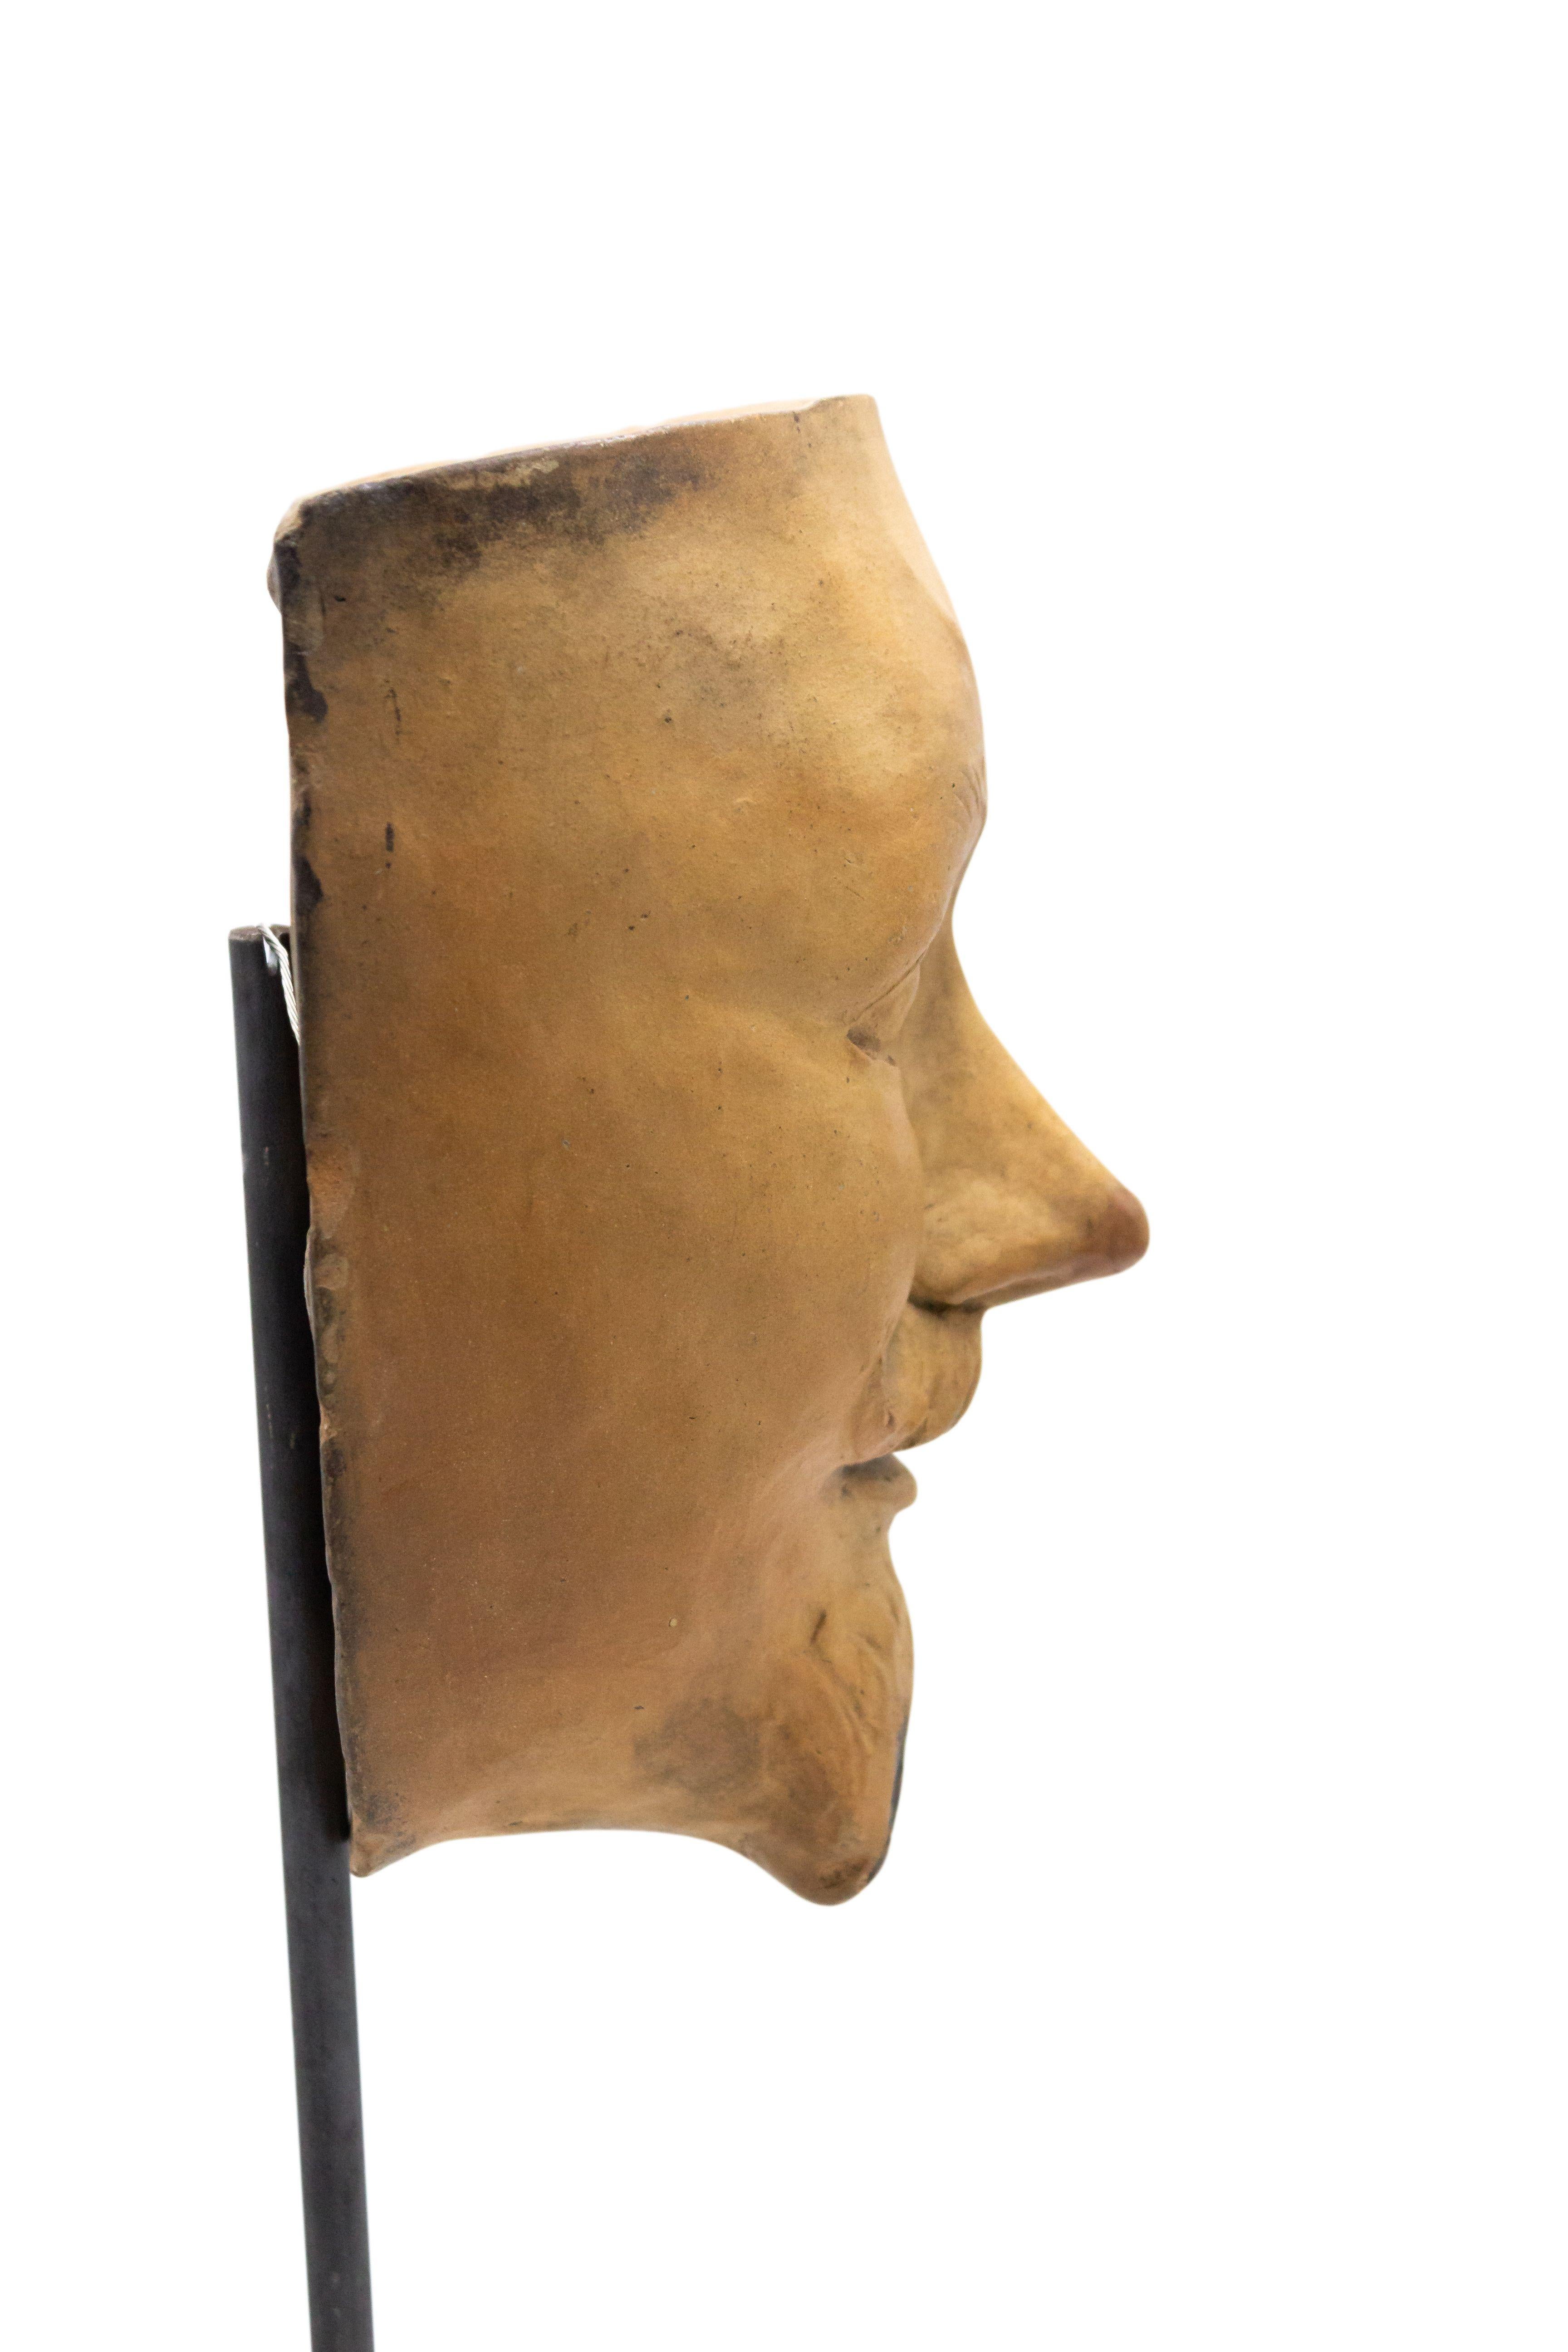 Other Continental German Terra-Cotta Mask For Sale